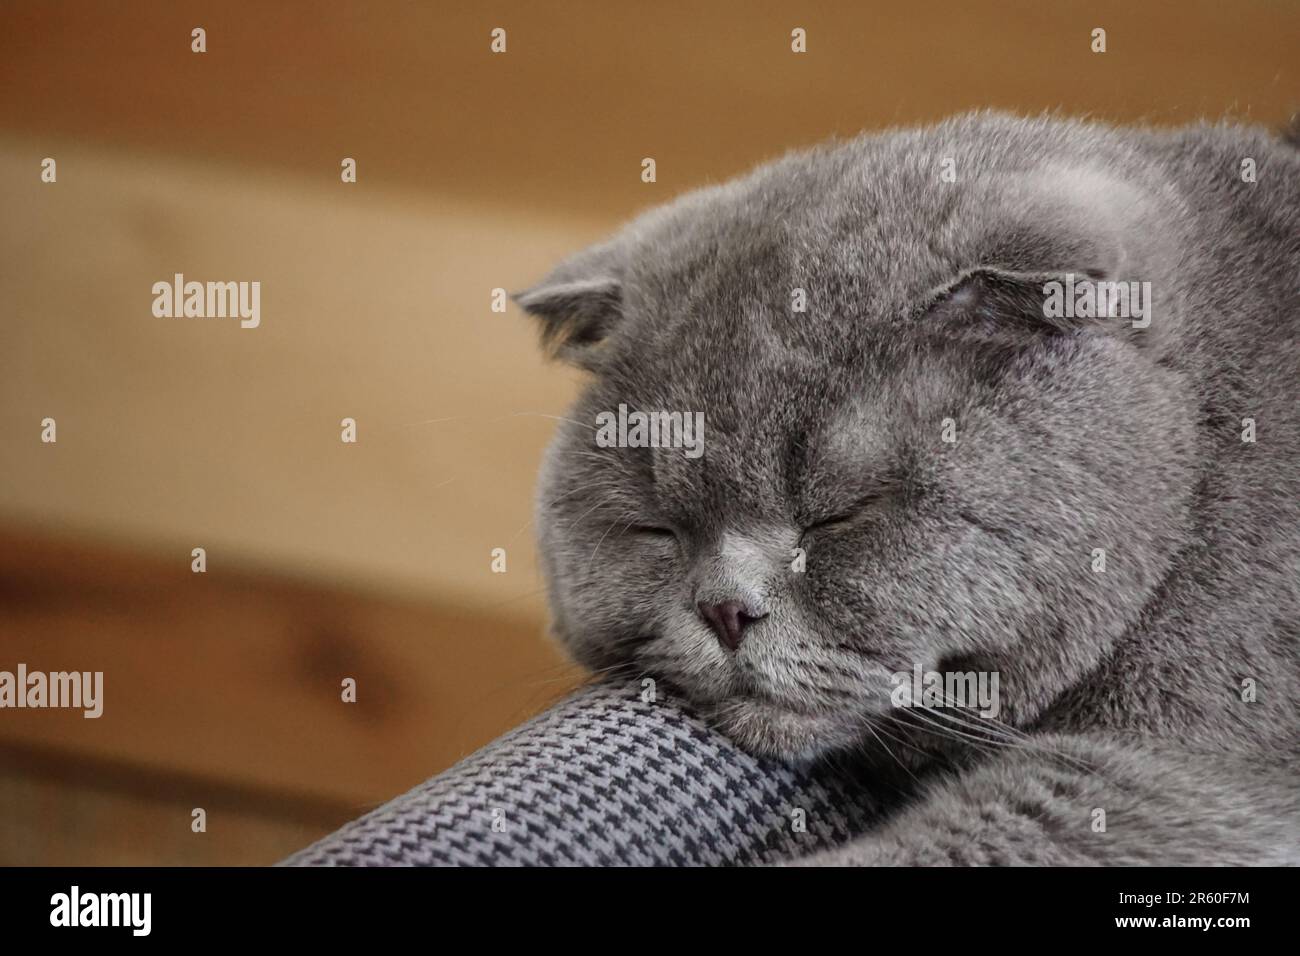 Cute scottish fold cat sleeping on the couch portrait close up view Stock Photo